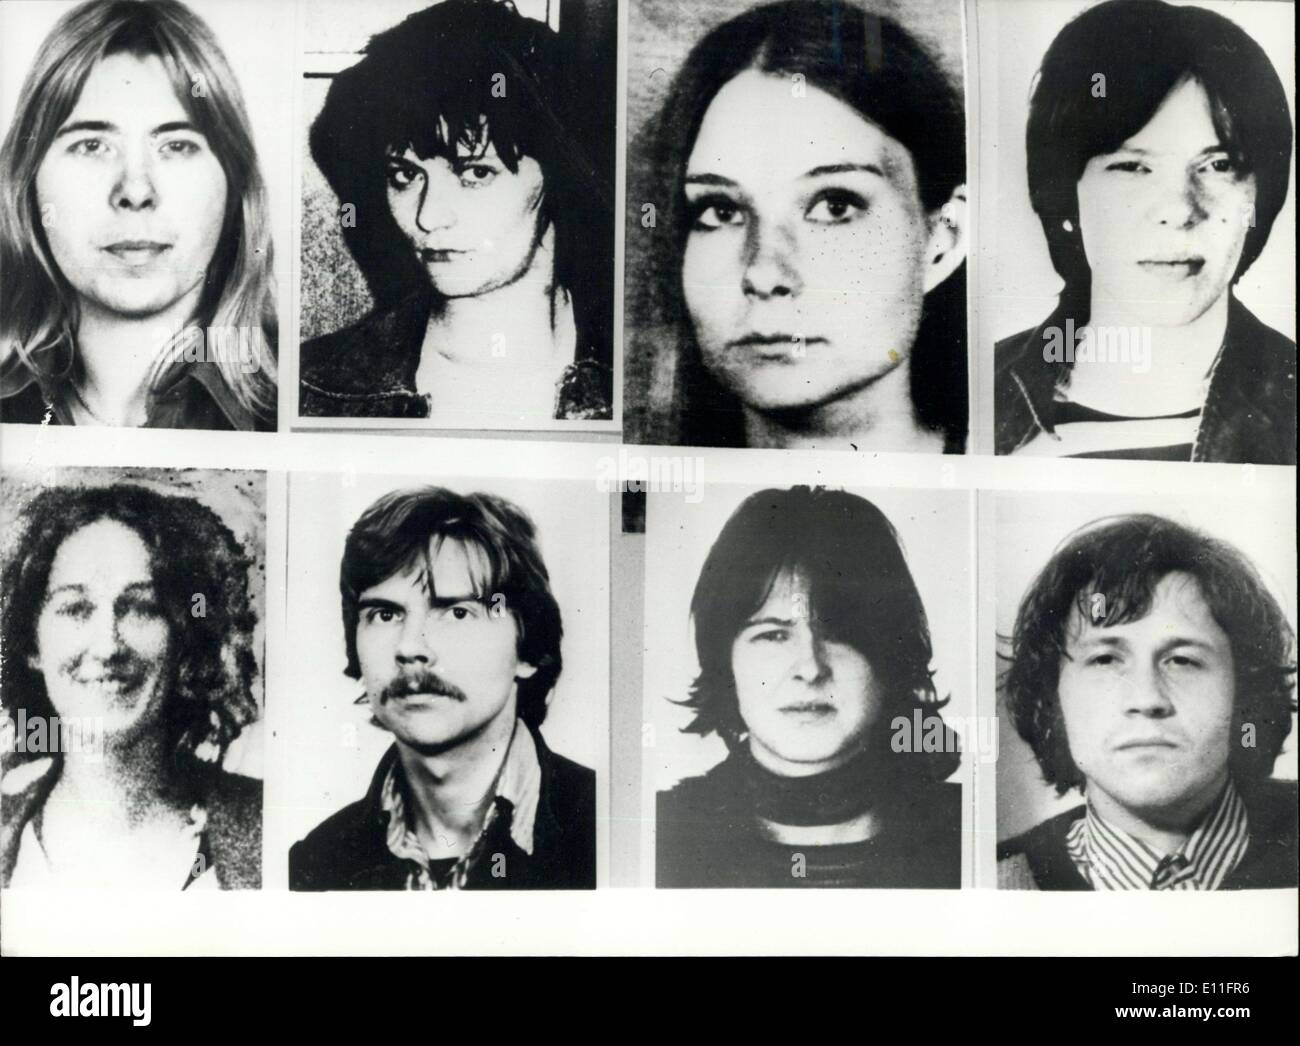 Oct. 25, 1977 - The Biggest Search In History For The Killer Of Dr Schleyer: In the very same night of October 19th, when the body of Hanna-Martin Schelyer was found, the FRG started biggest search in the history of the Germany. Wanted are 16 terrorist in connection with the murder of Schleyer. Thousands of posters and handbills have been handed out by the police. Photo Shows L-R: Inge Viett, Juliane Plambeox, Angelika Speitel, and Susanne Albrecht, Bottom Stock Photo